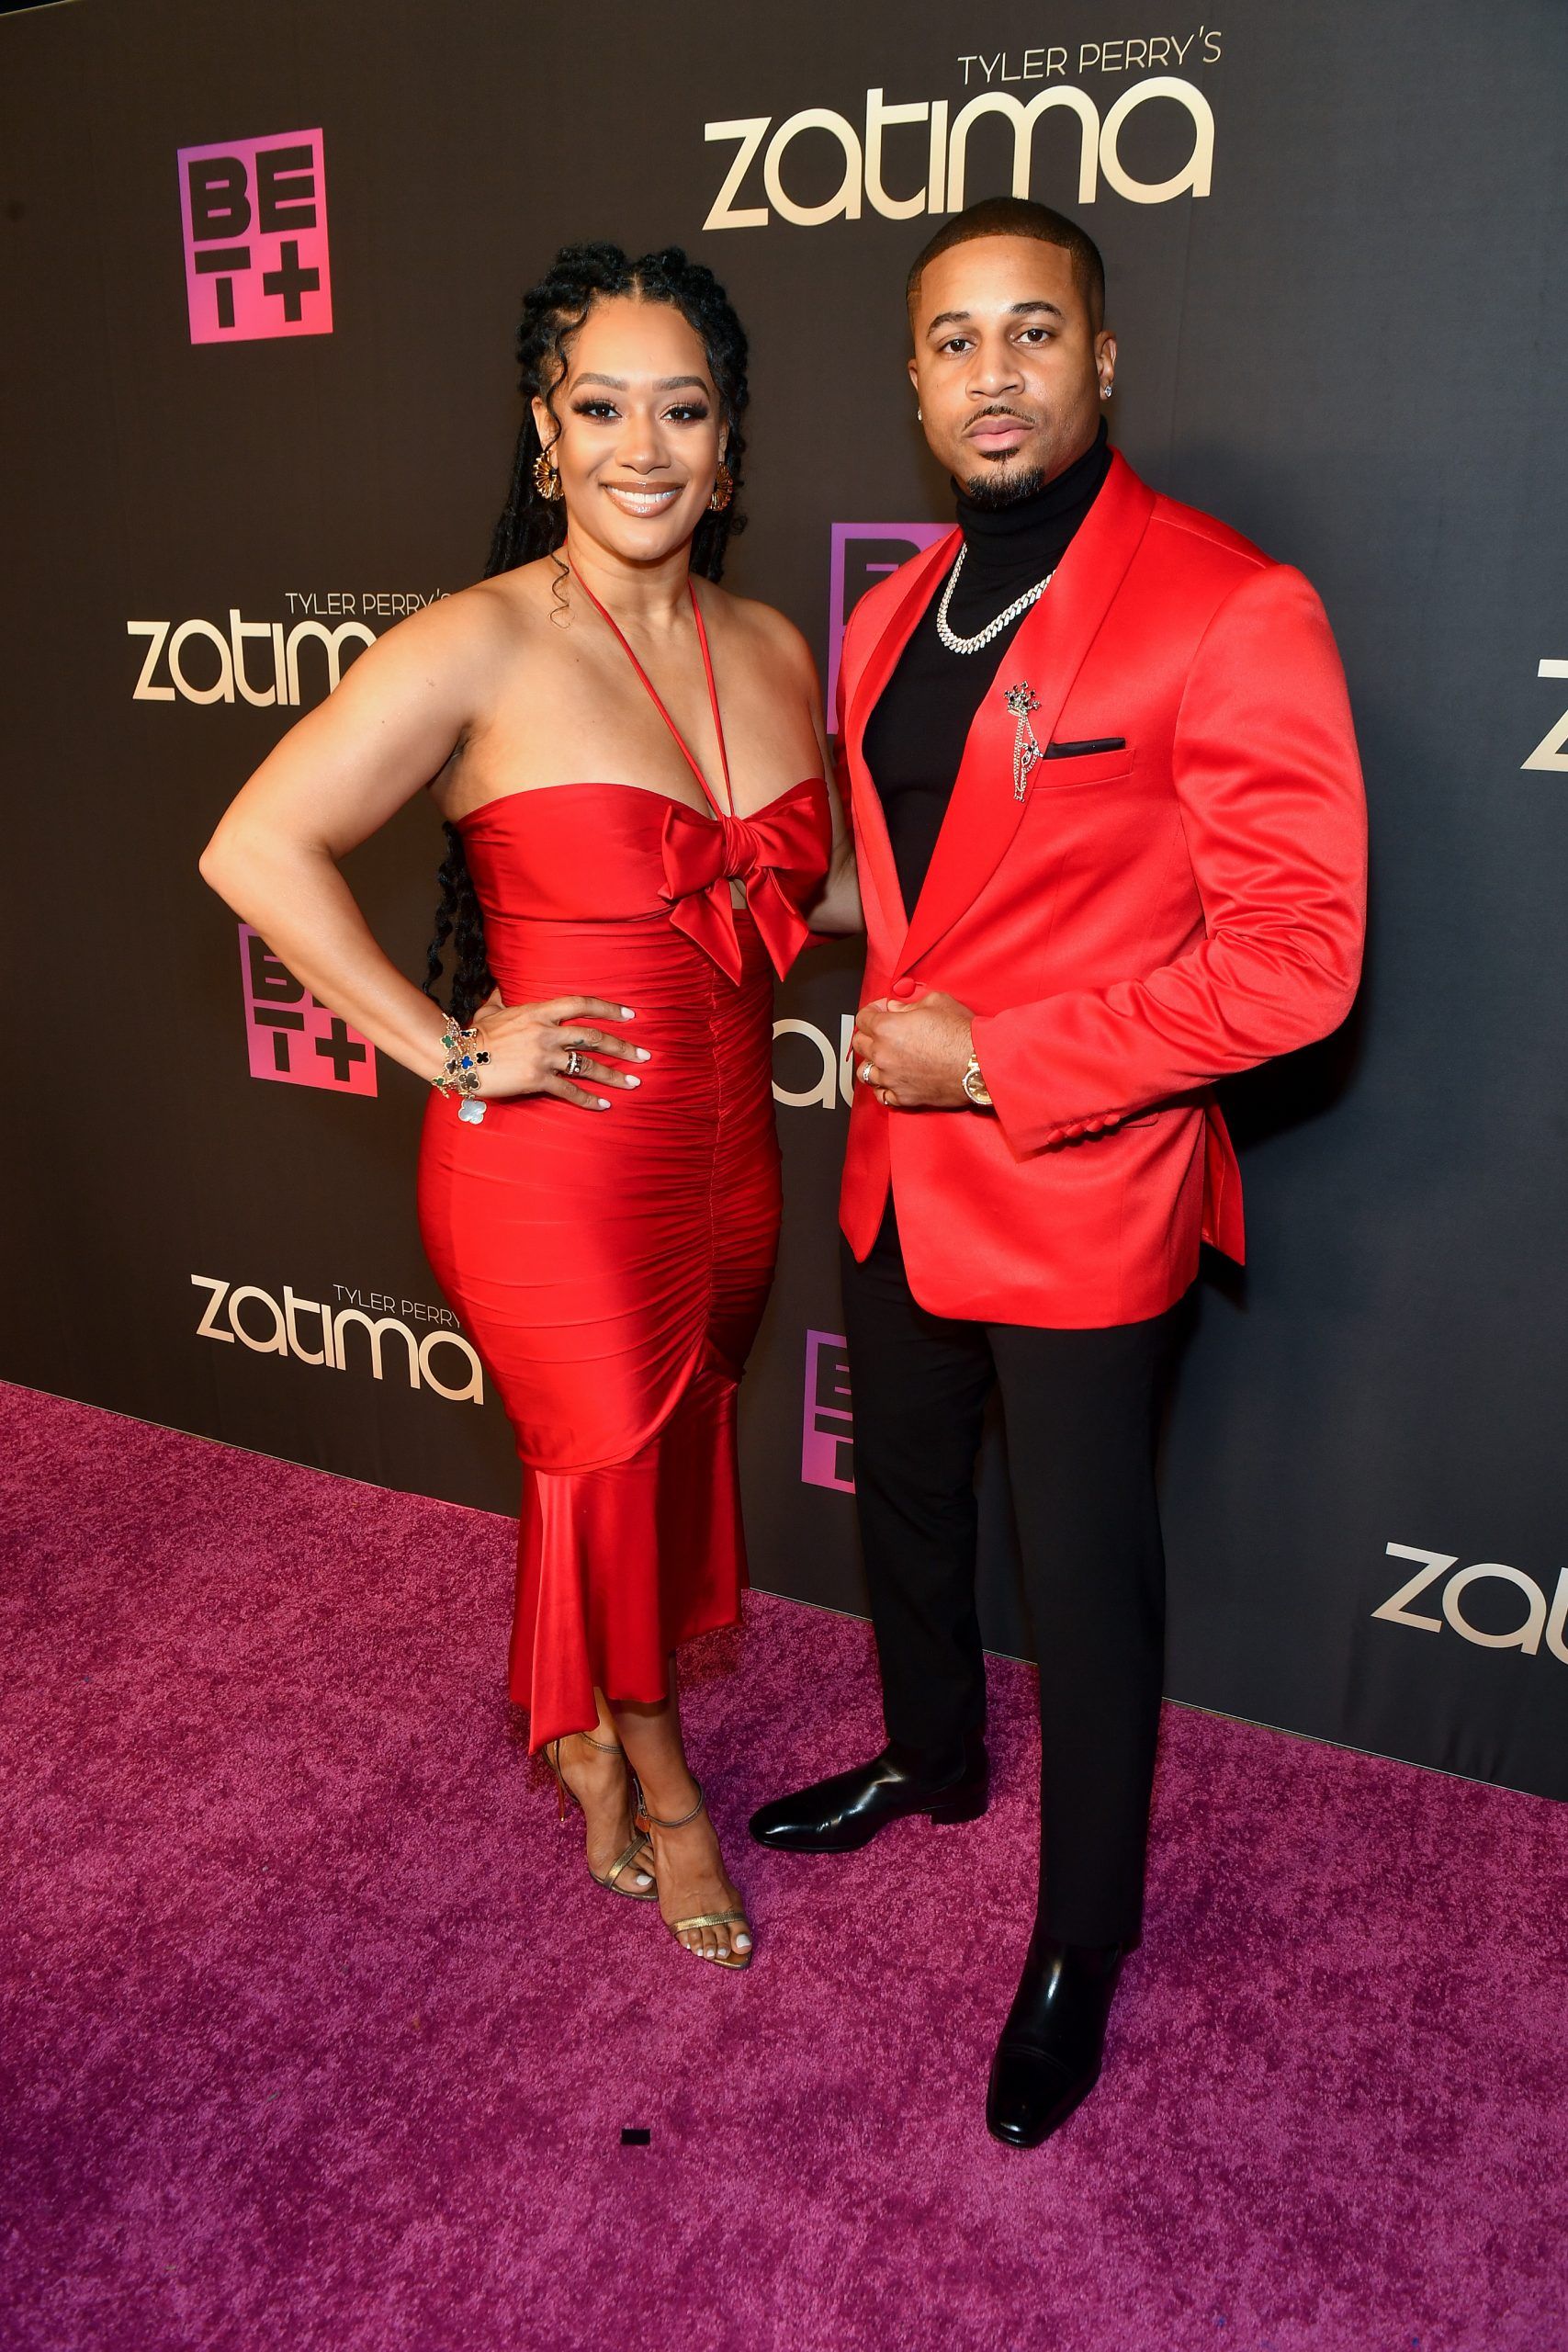 BET+ Celebrates The Season 2 Premiere of Tyler Perry’s ‘Zatima’ With A Private Screening At Virtue Rooftop Lounge In Atl